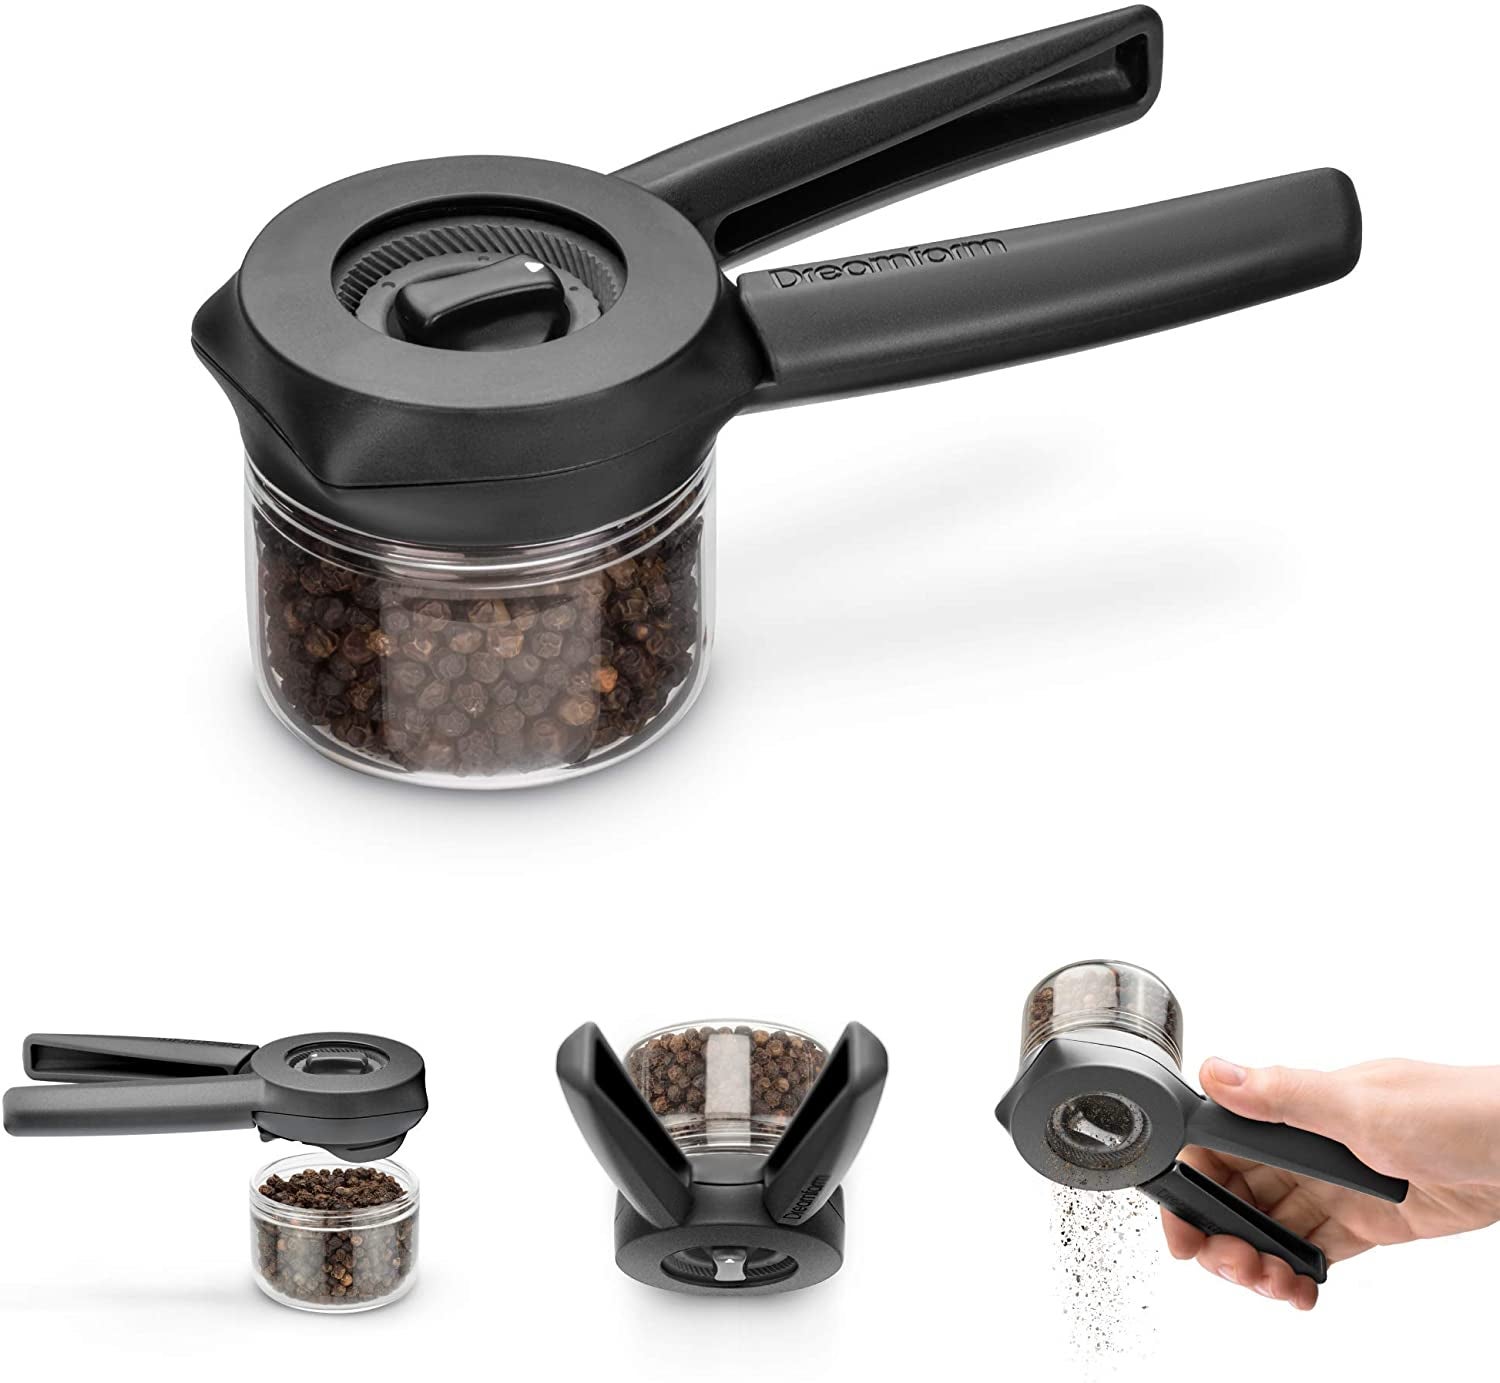 the one-handed pepper grinder tool